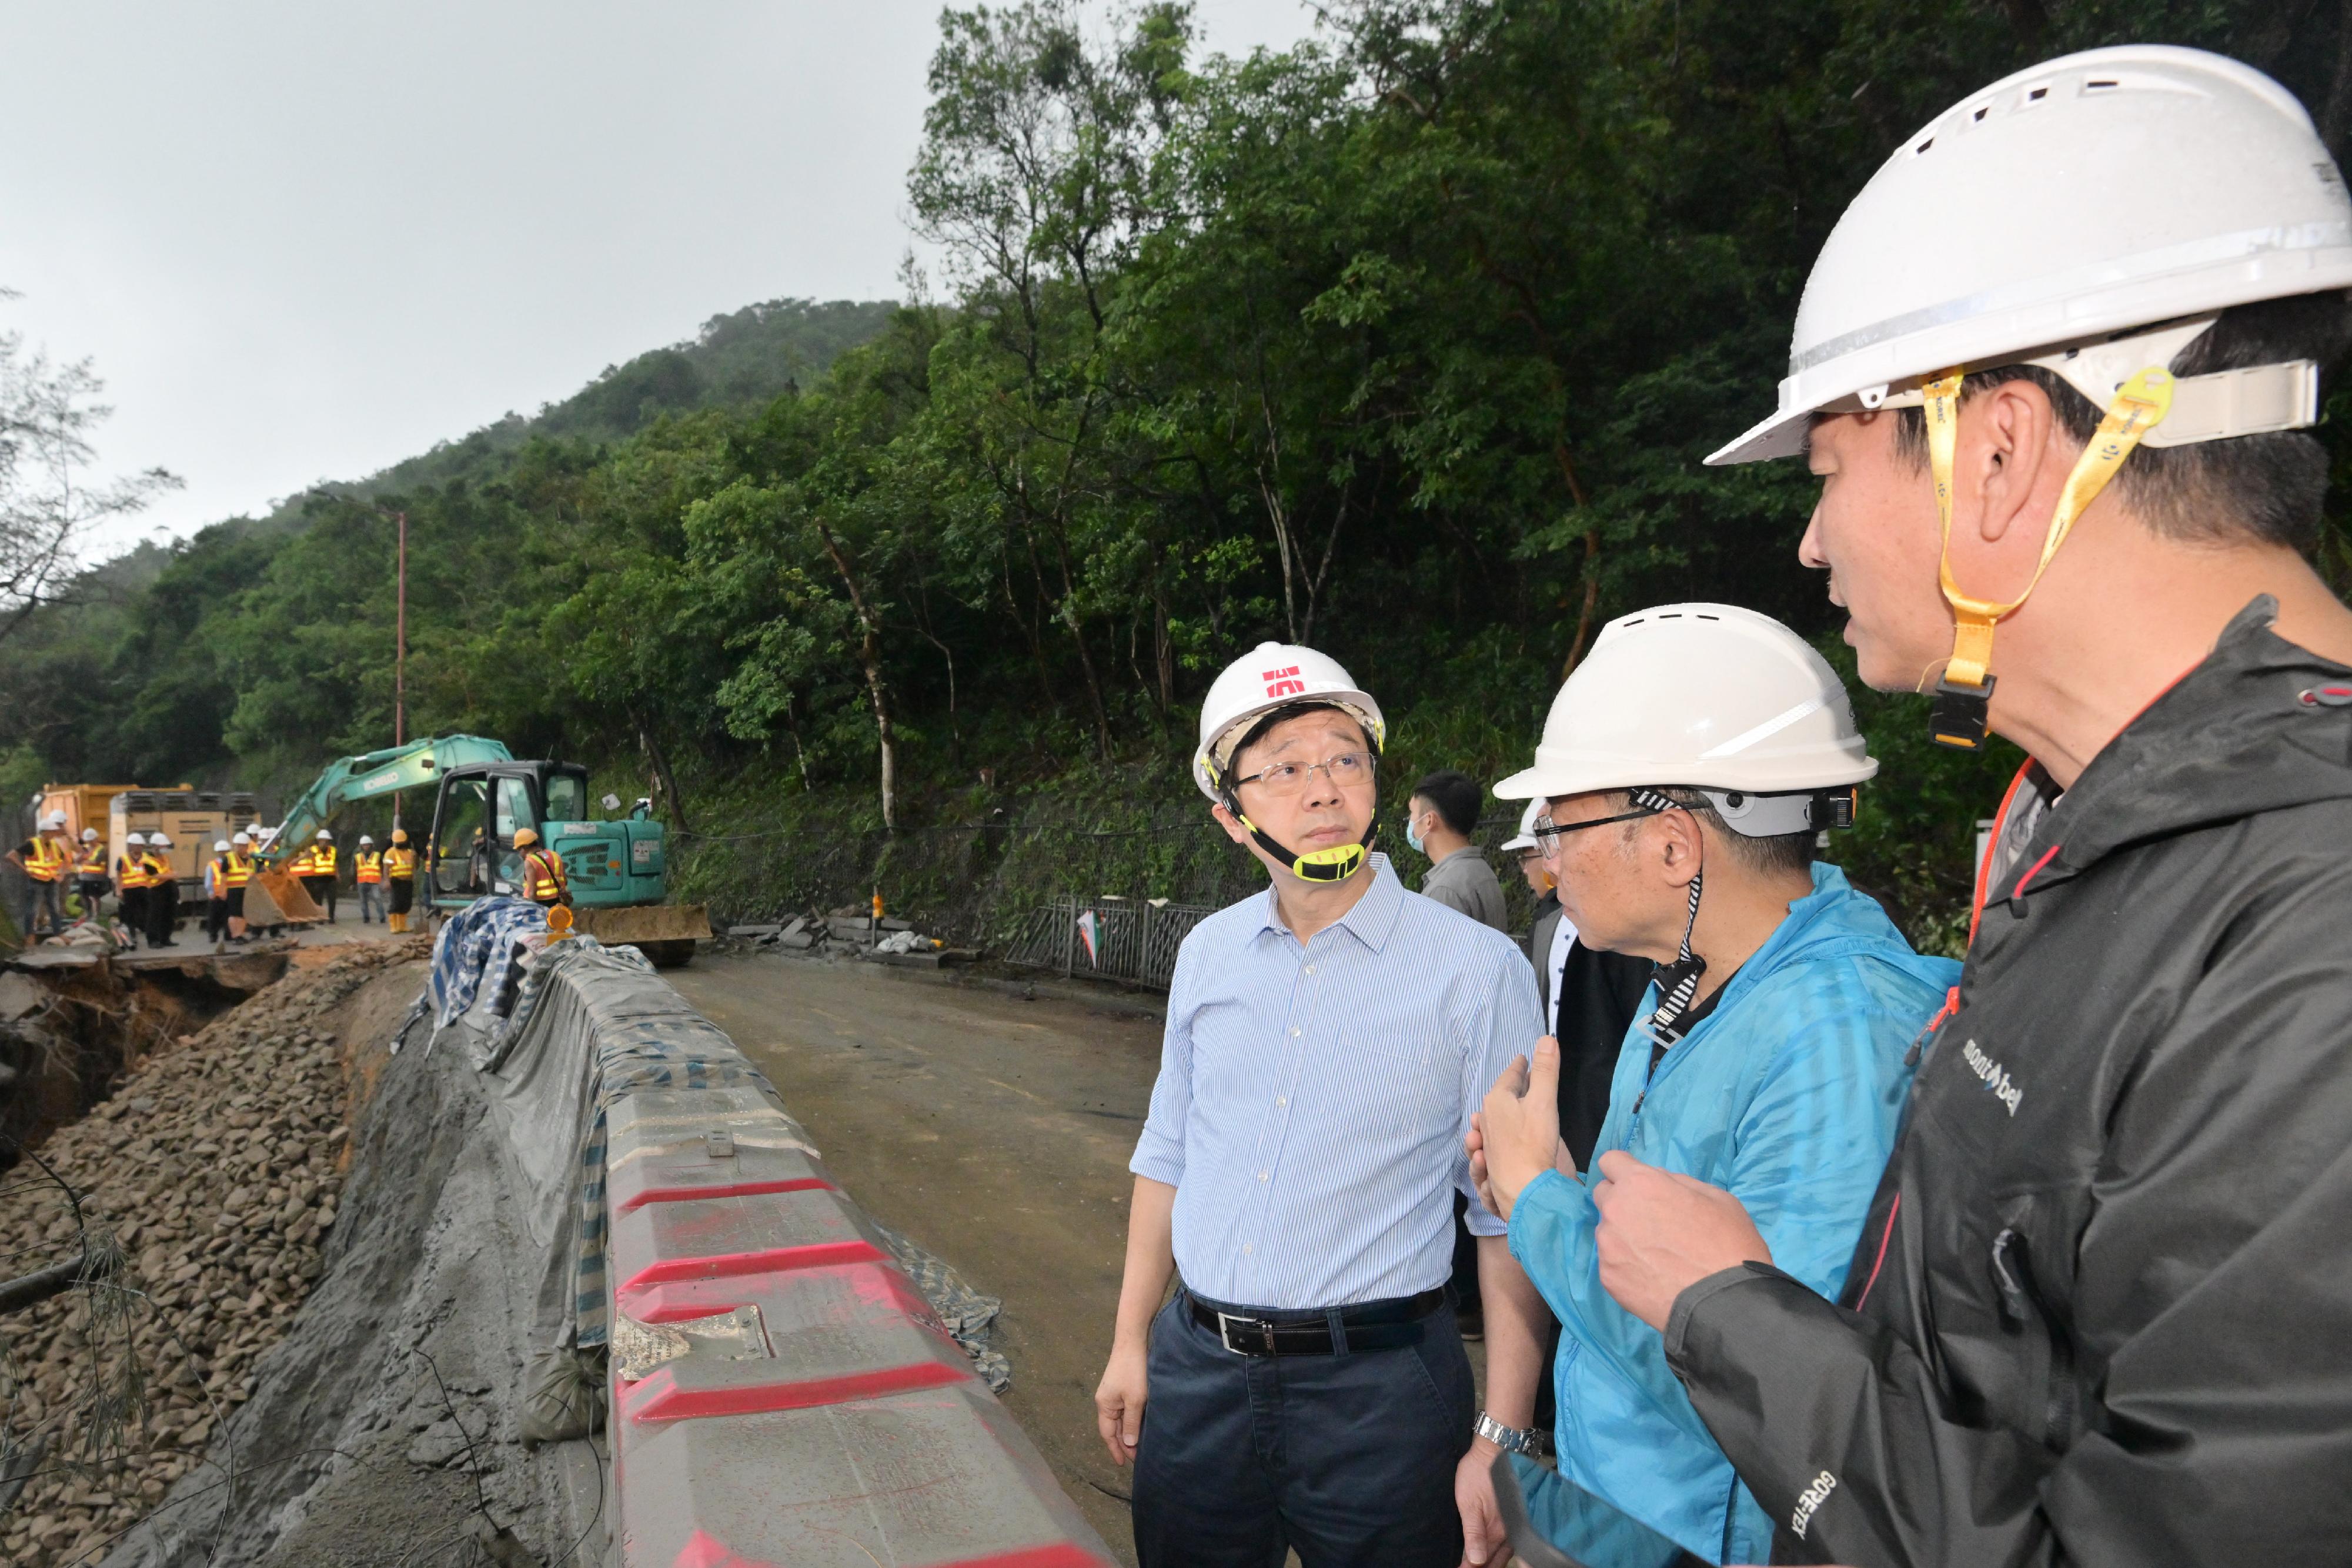 The Chief Executive, Mr John Lee, visited Shek O Road to inspect relief work in the wake of torrential rain today (September 9). Photo shows Mr Lee (third right), accompanied by the Secretary for Transport and Logistics, Mr Lam Sai-hung (second right), inspecting the road repair works.